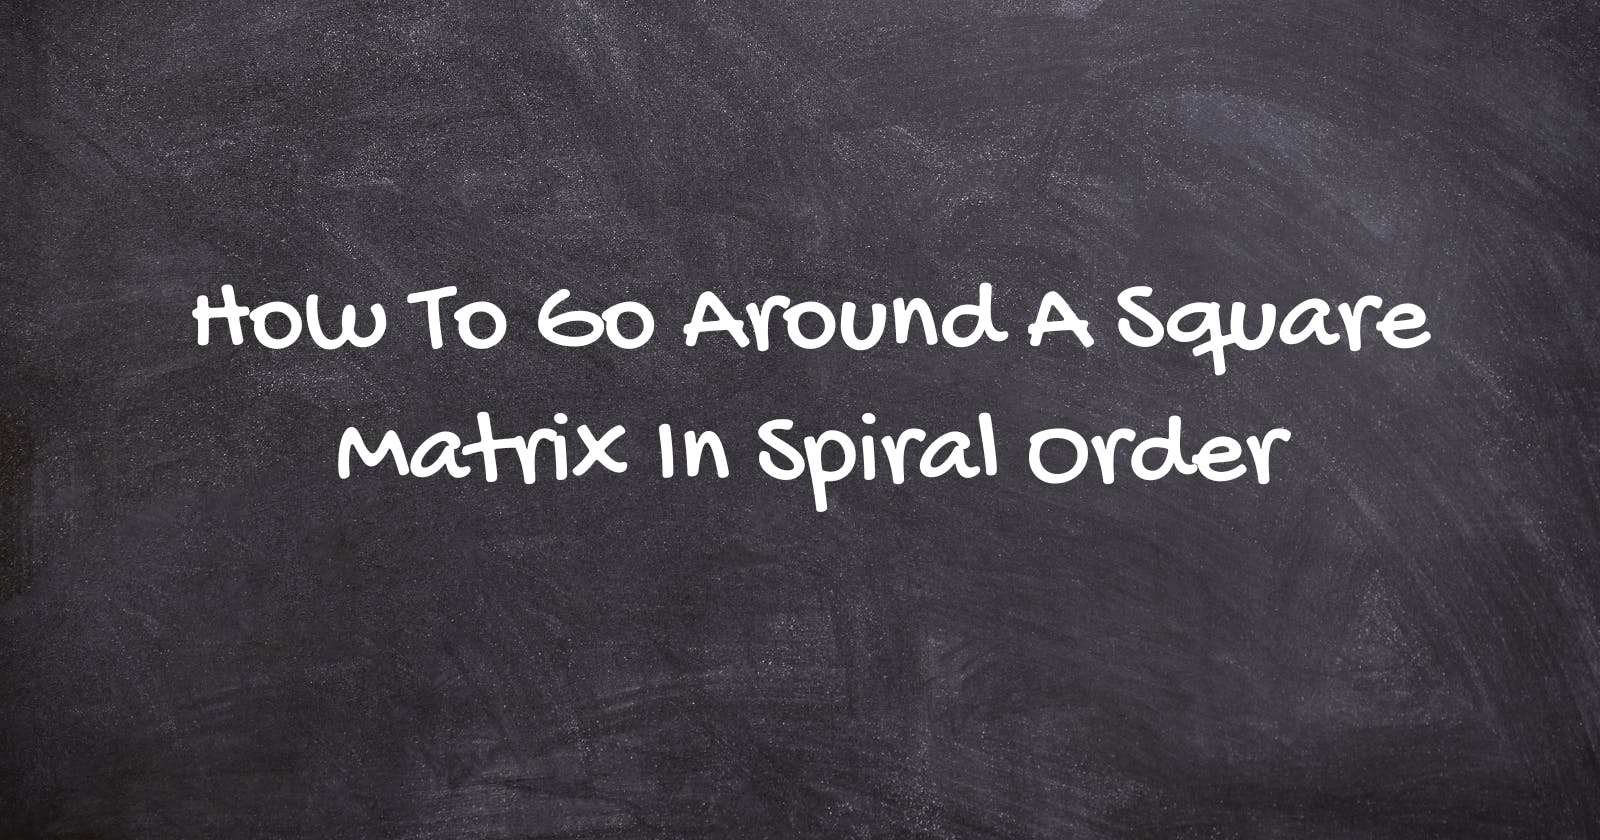 How To Go Around A Square Matrix In Spiral Order